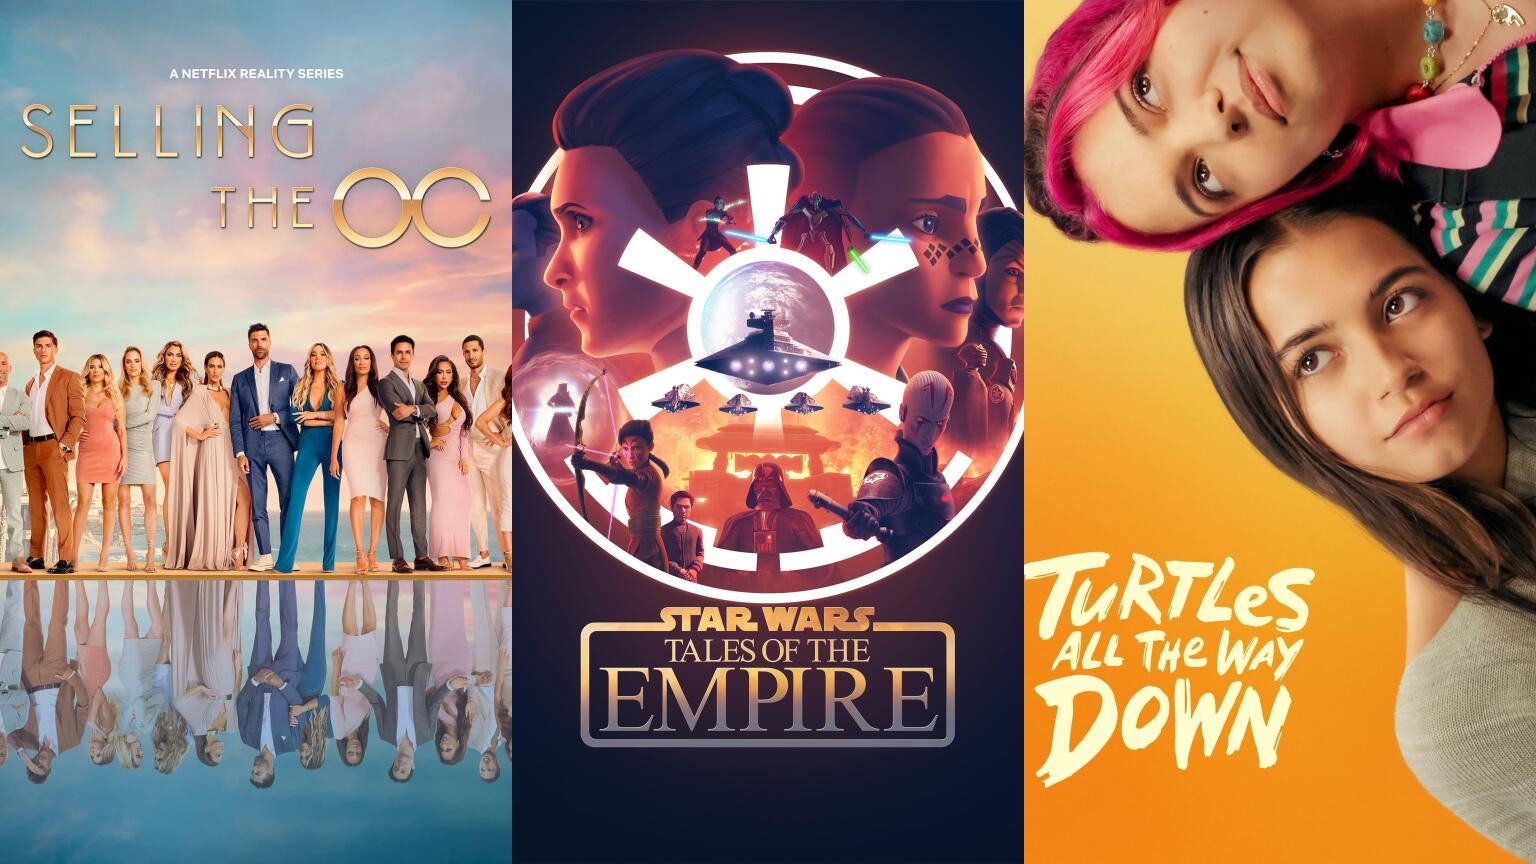 Posters for "Selling the OC," "Star Wars: Tales of the Empire," and "Turles All the Way Down"